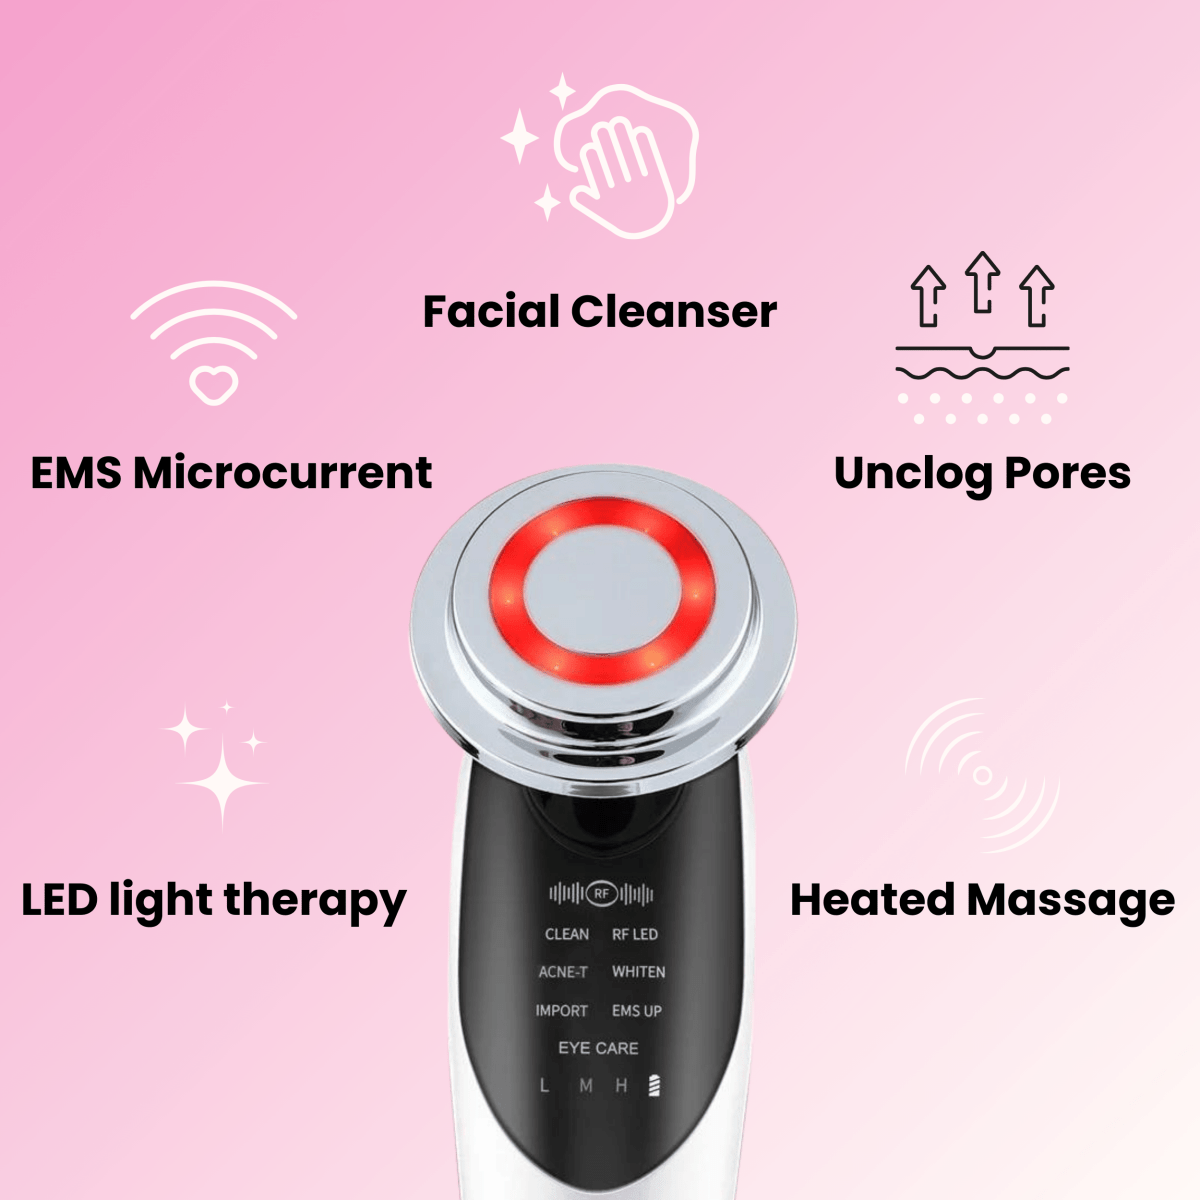 Tri-light LED therapy facial device benefits including heated massage, unclogging pores, cleansing and EMS microcurrent